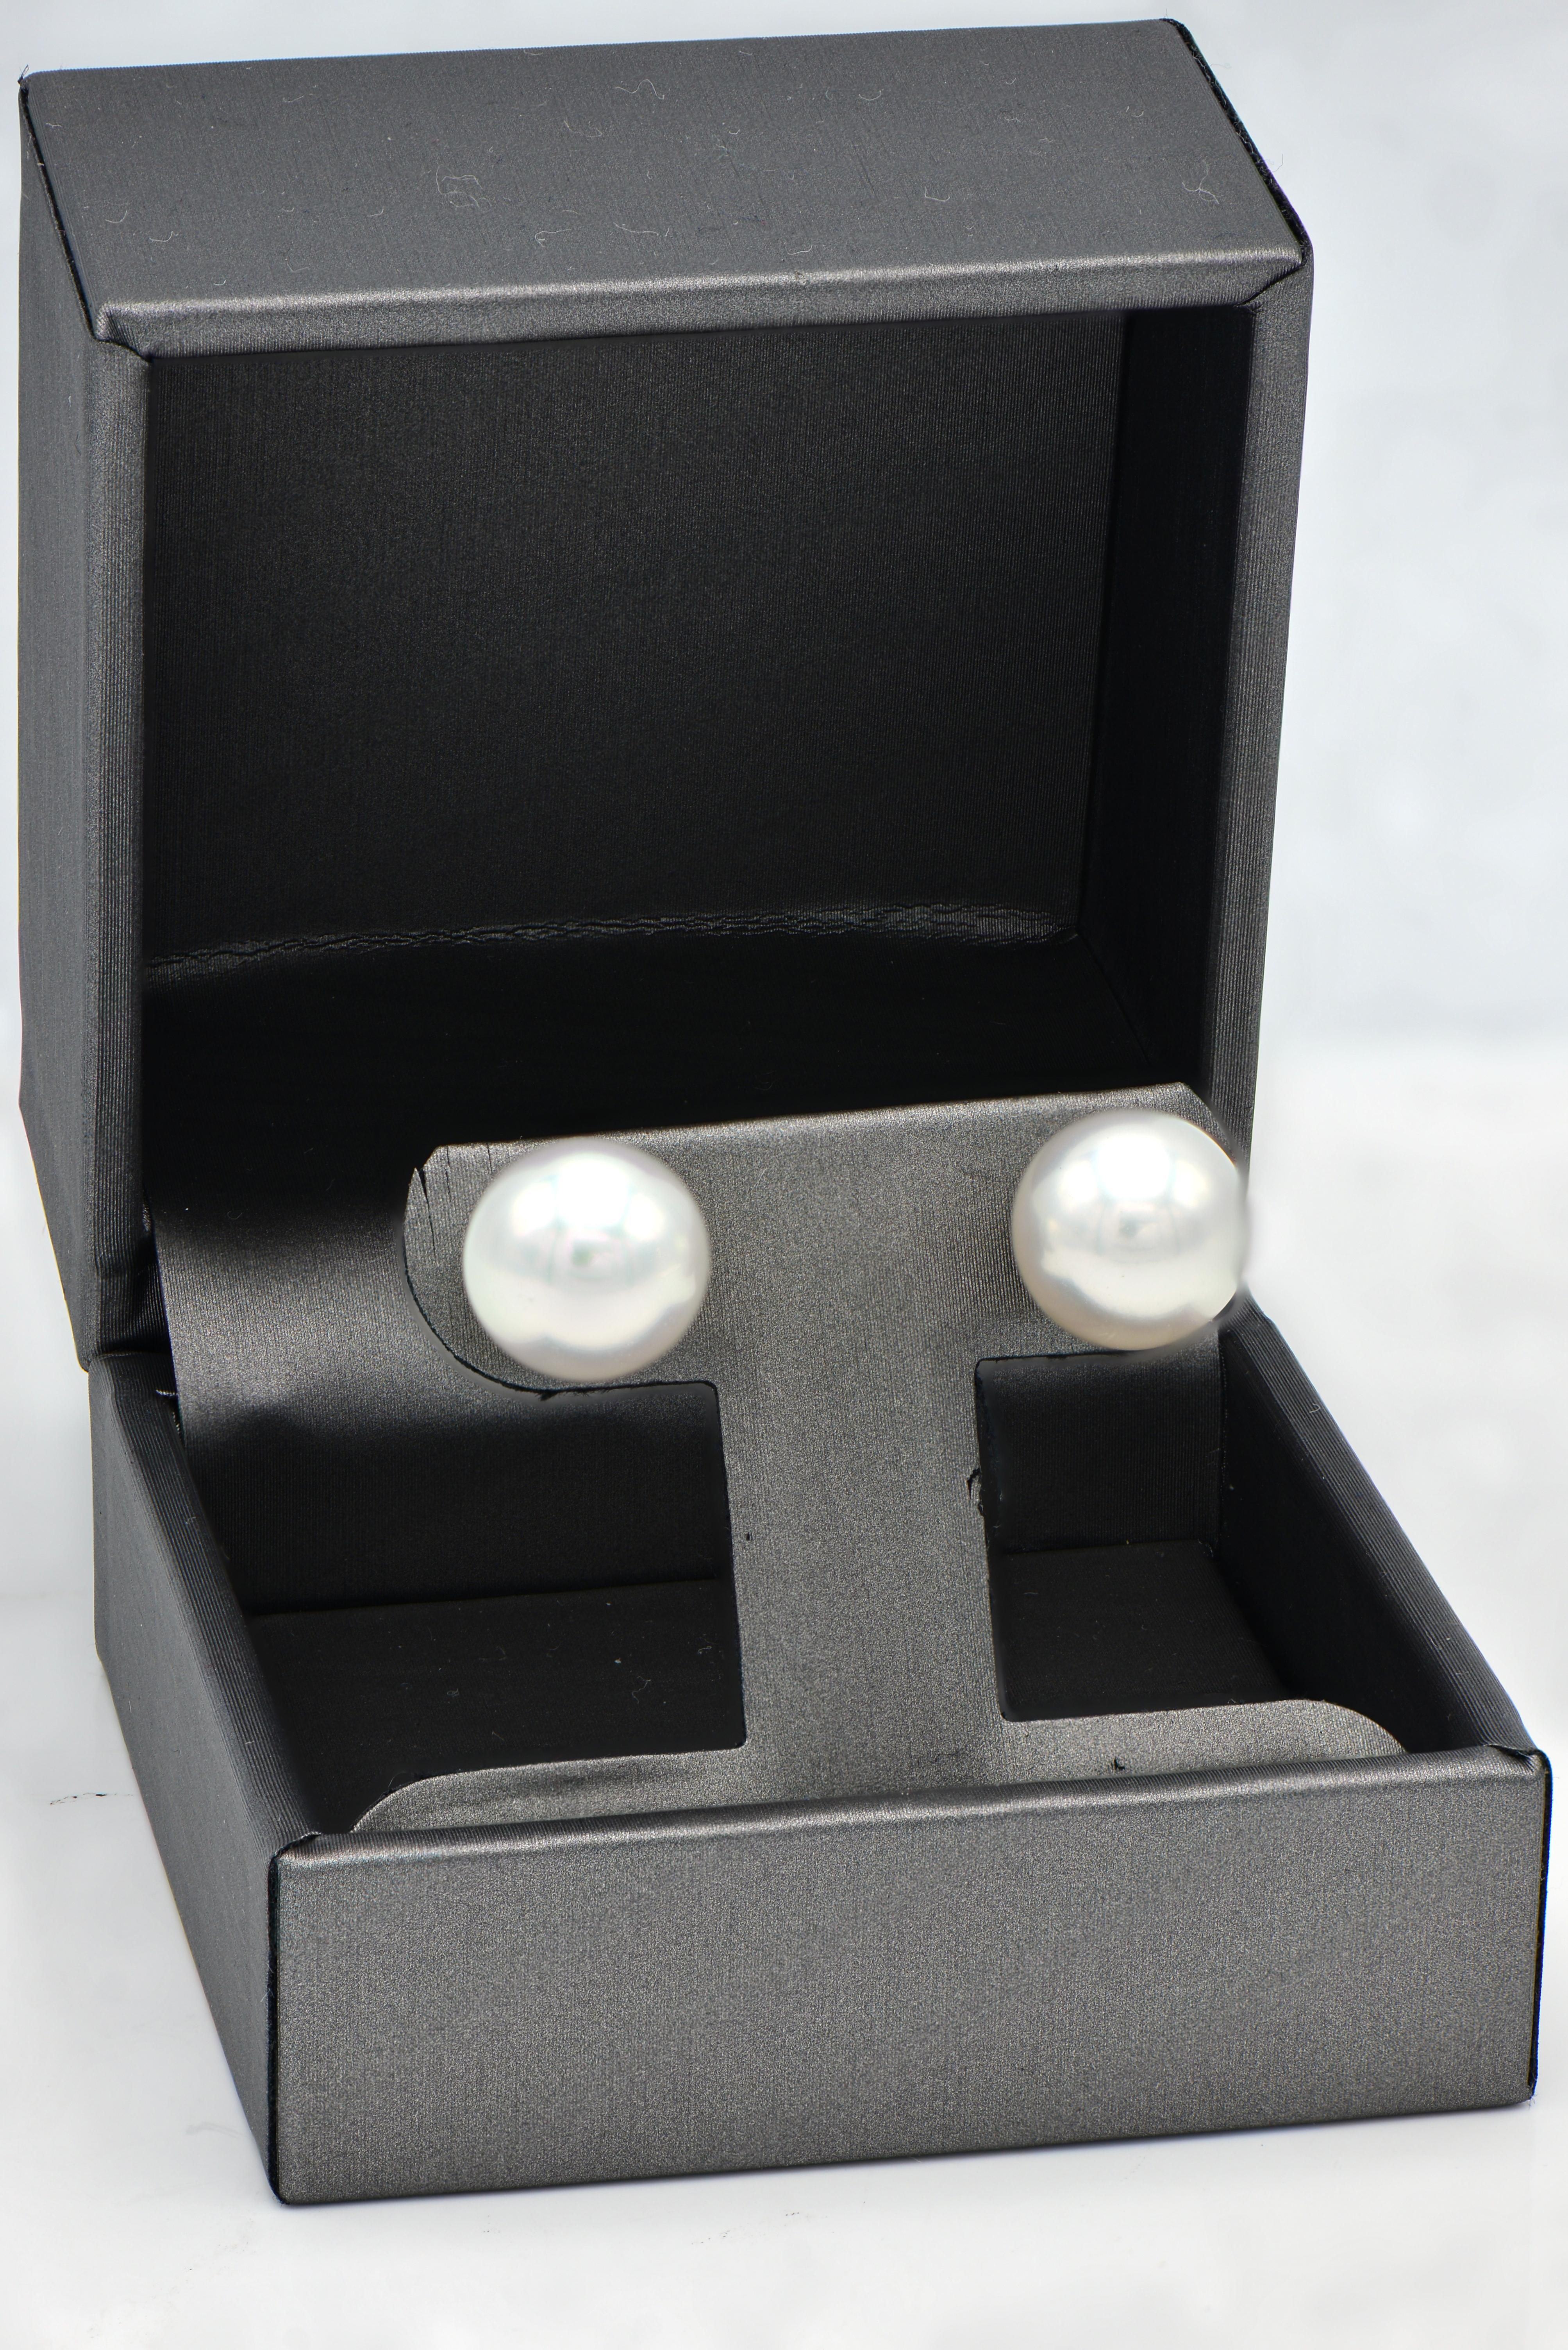 South Sea Pearl Stud Earrings are a classic and timeless piece of jewelry that should be owned by everyone. South Sea studs are slightly larger than cultured pearl studs for a bigger more sophisticated look. These 12-12.5mm South Sea Pearl Studs are